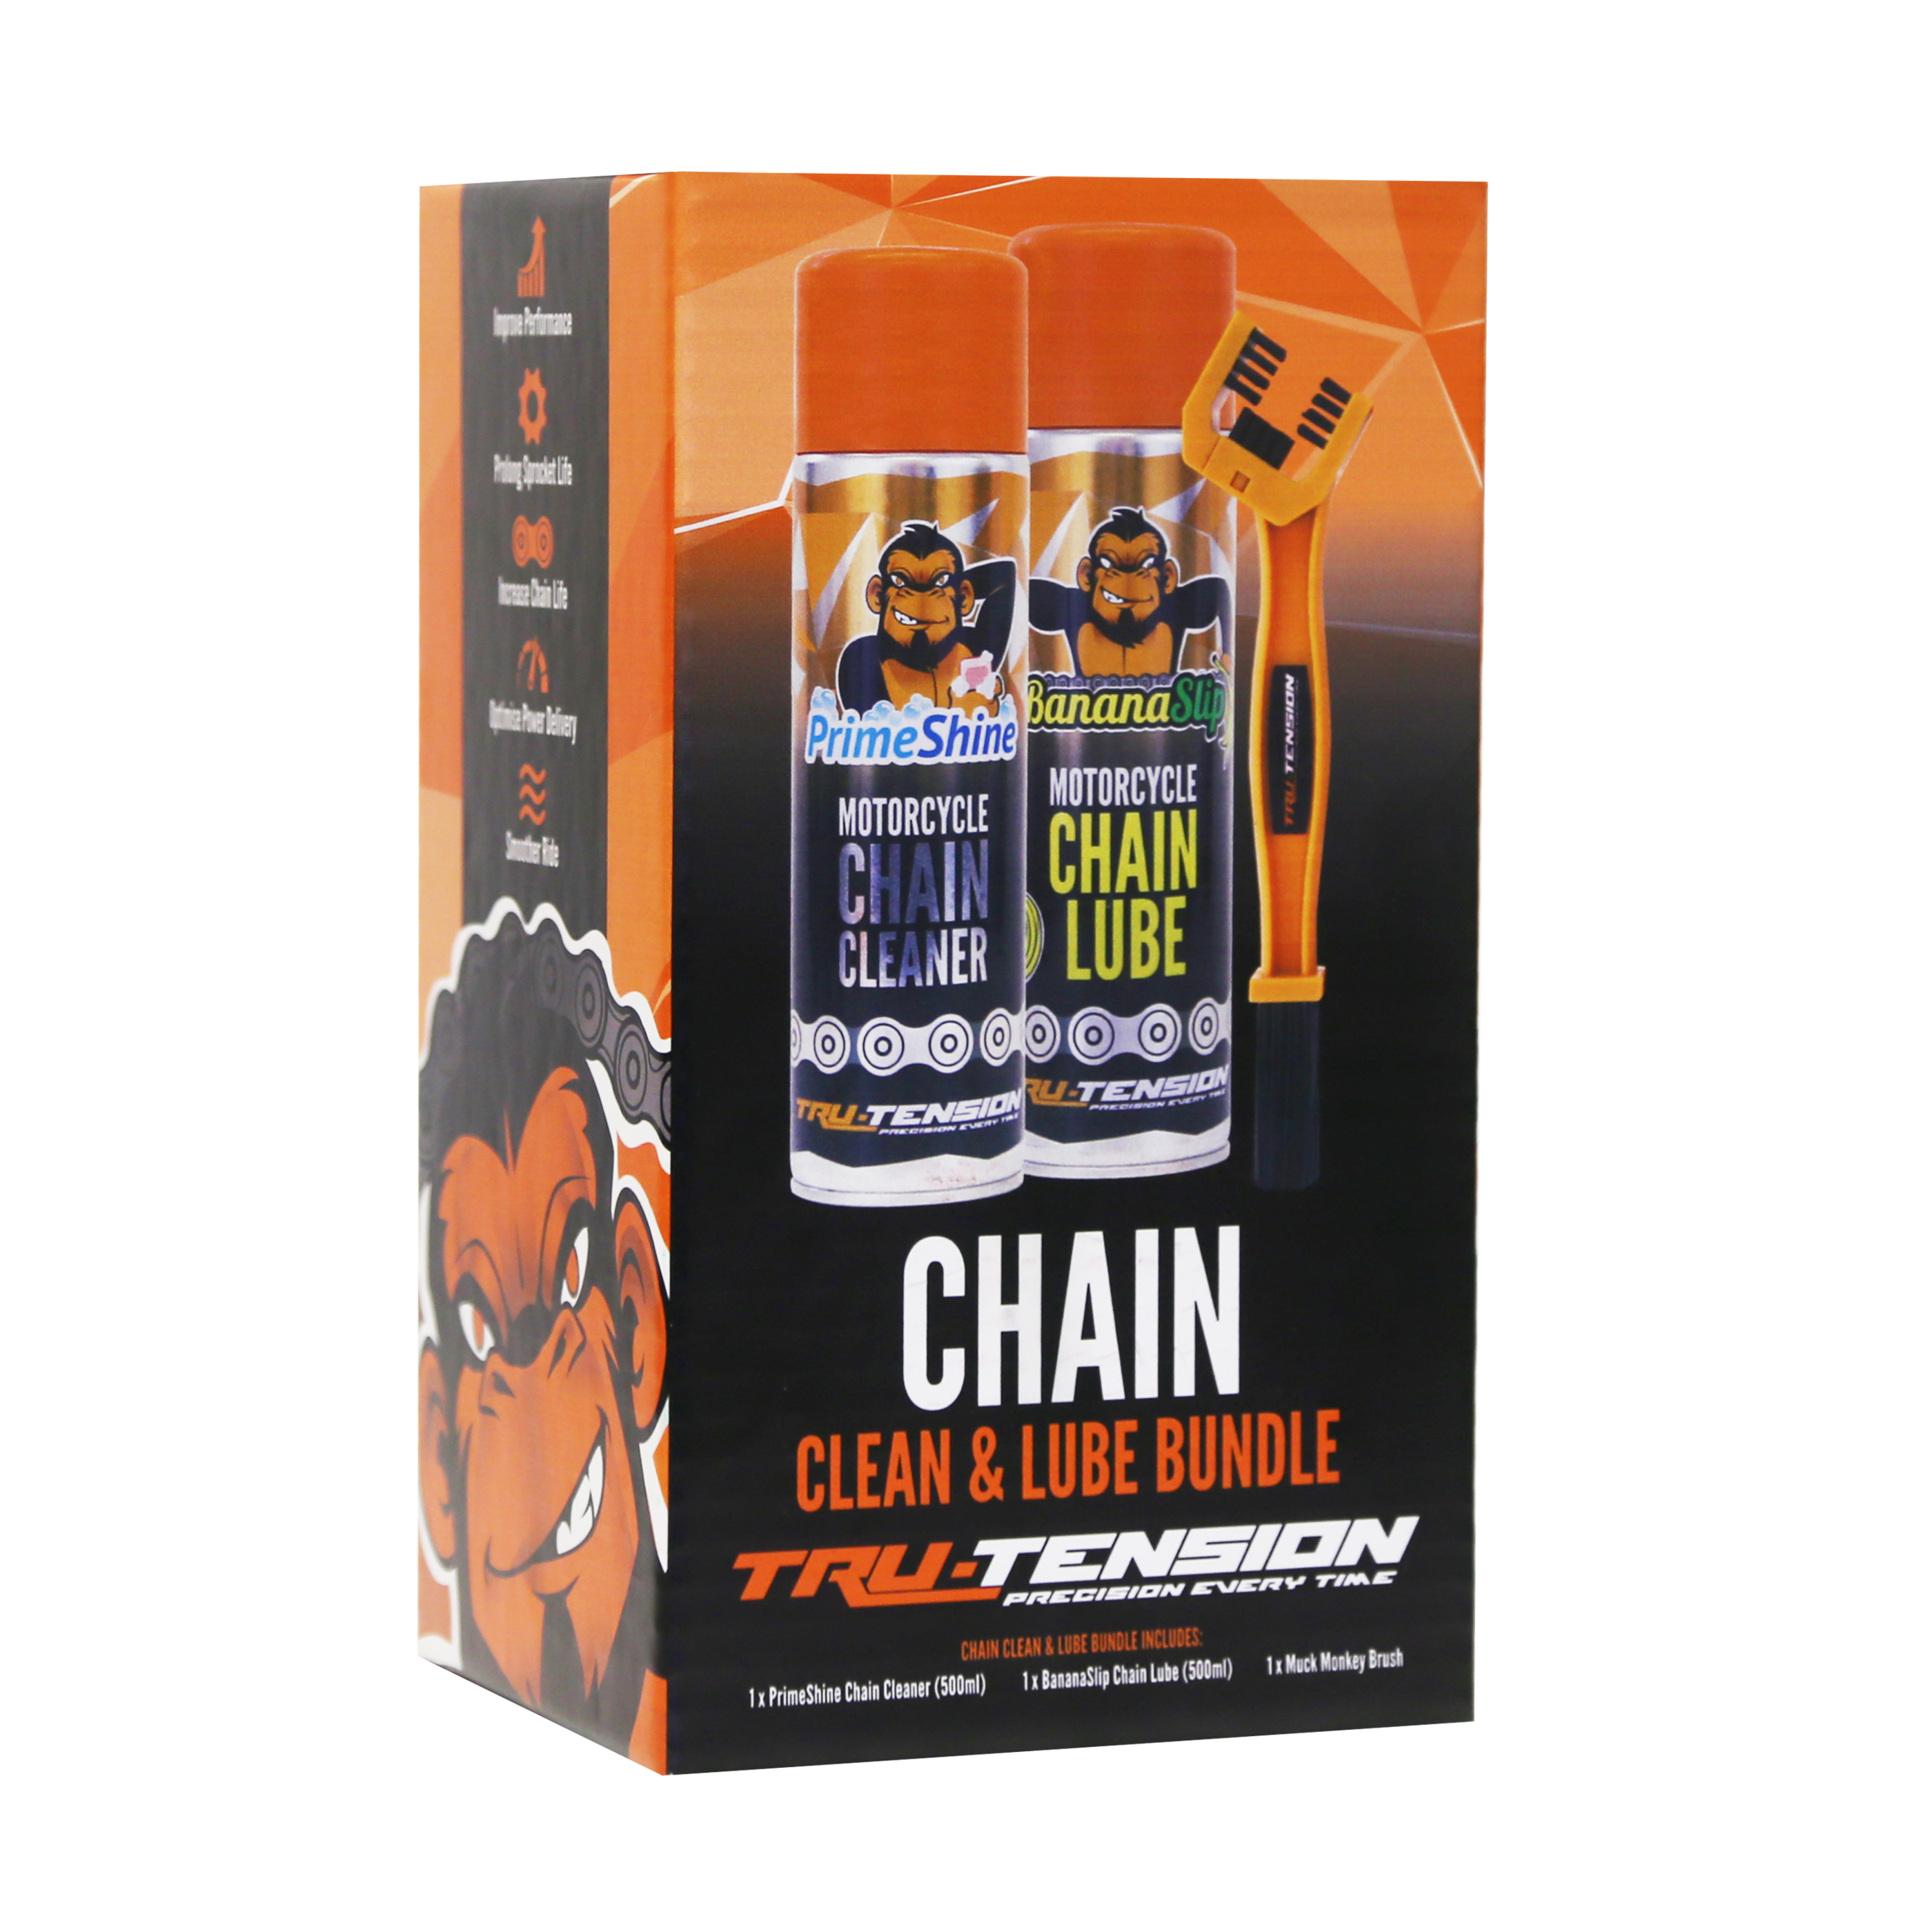 Motorcycle chain cleaner motorcycle lubricant chain oil